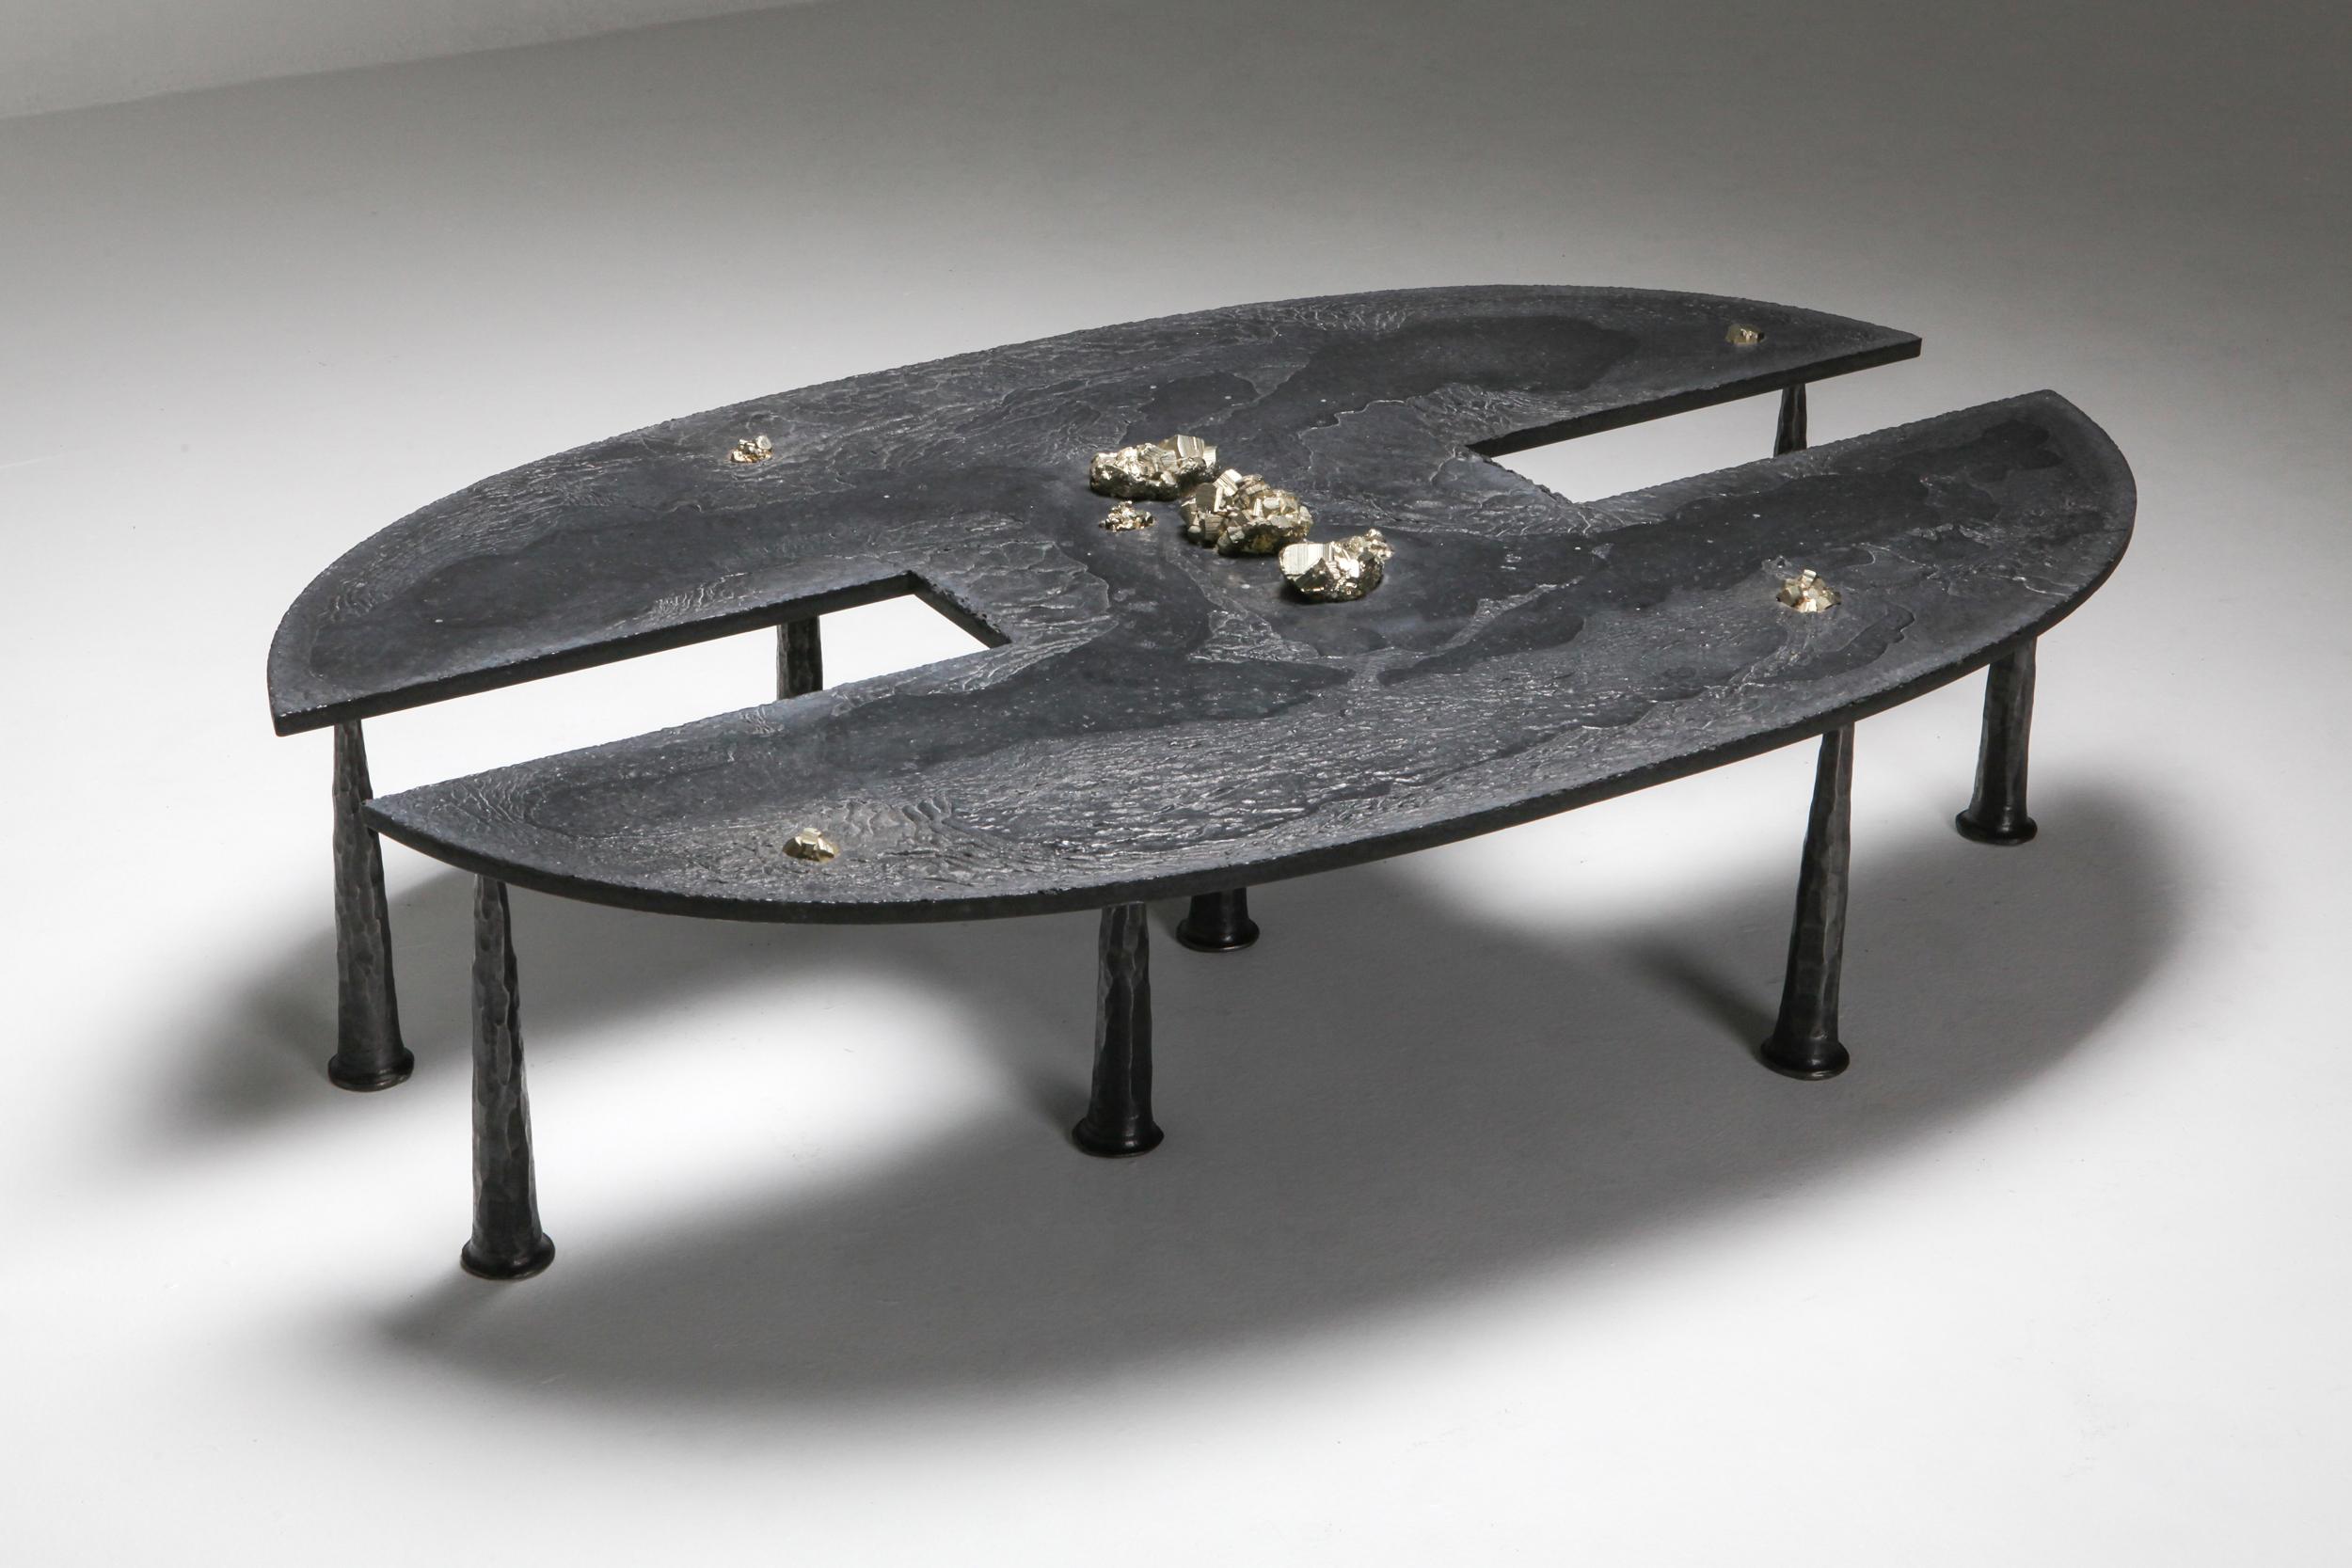 Brutalist Contemporary Coffee Table by Thomas Serruys In Excellent Condition For Sale In Antwerp, BE